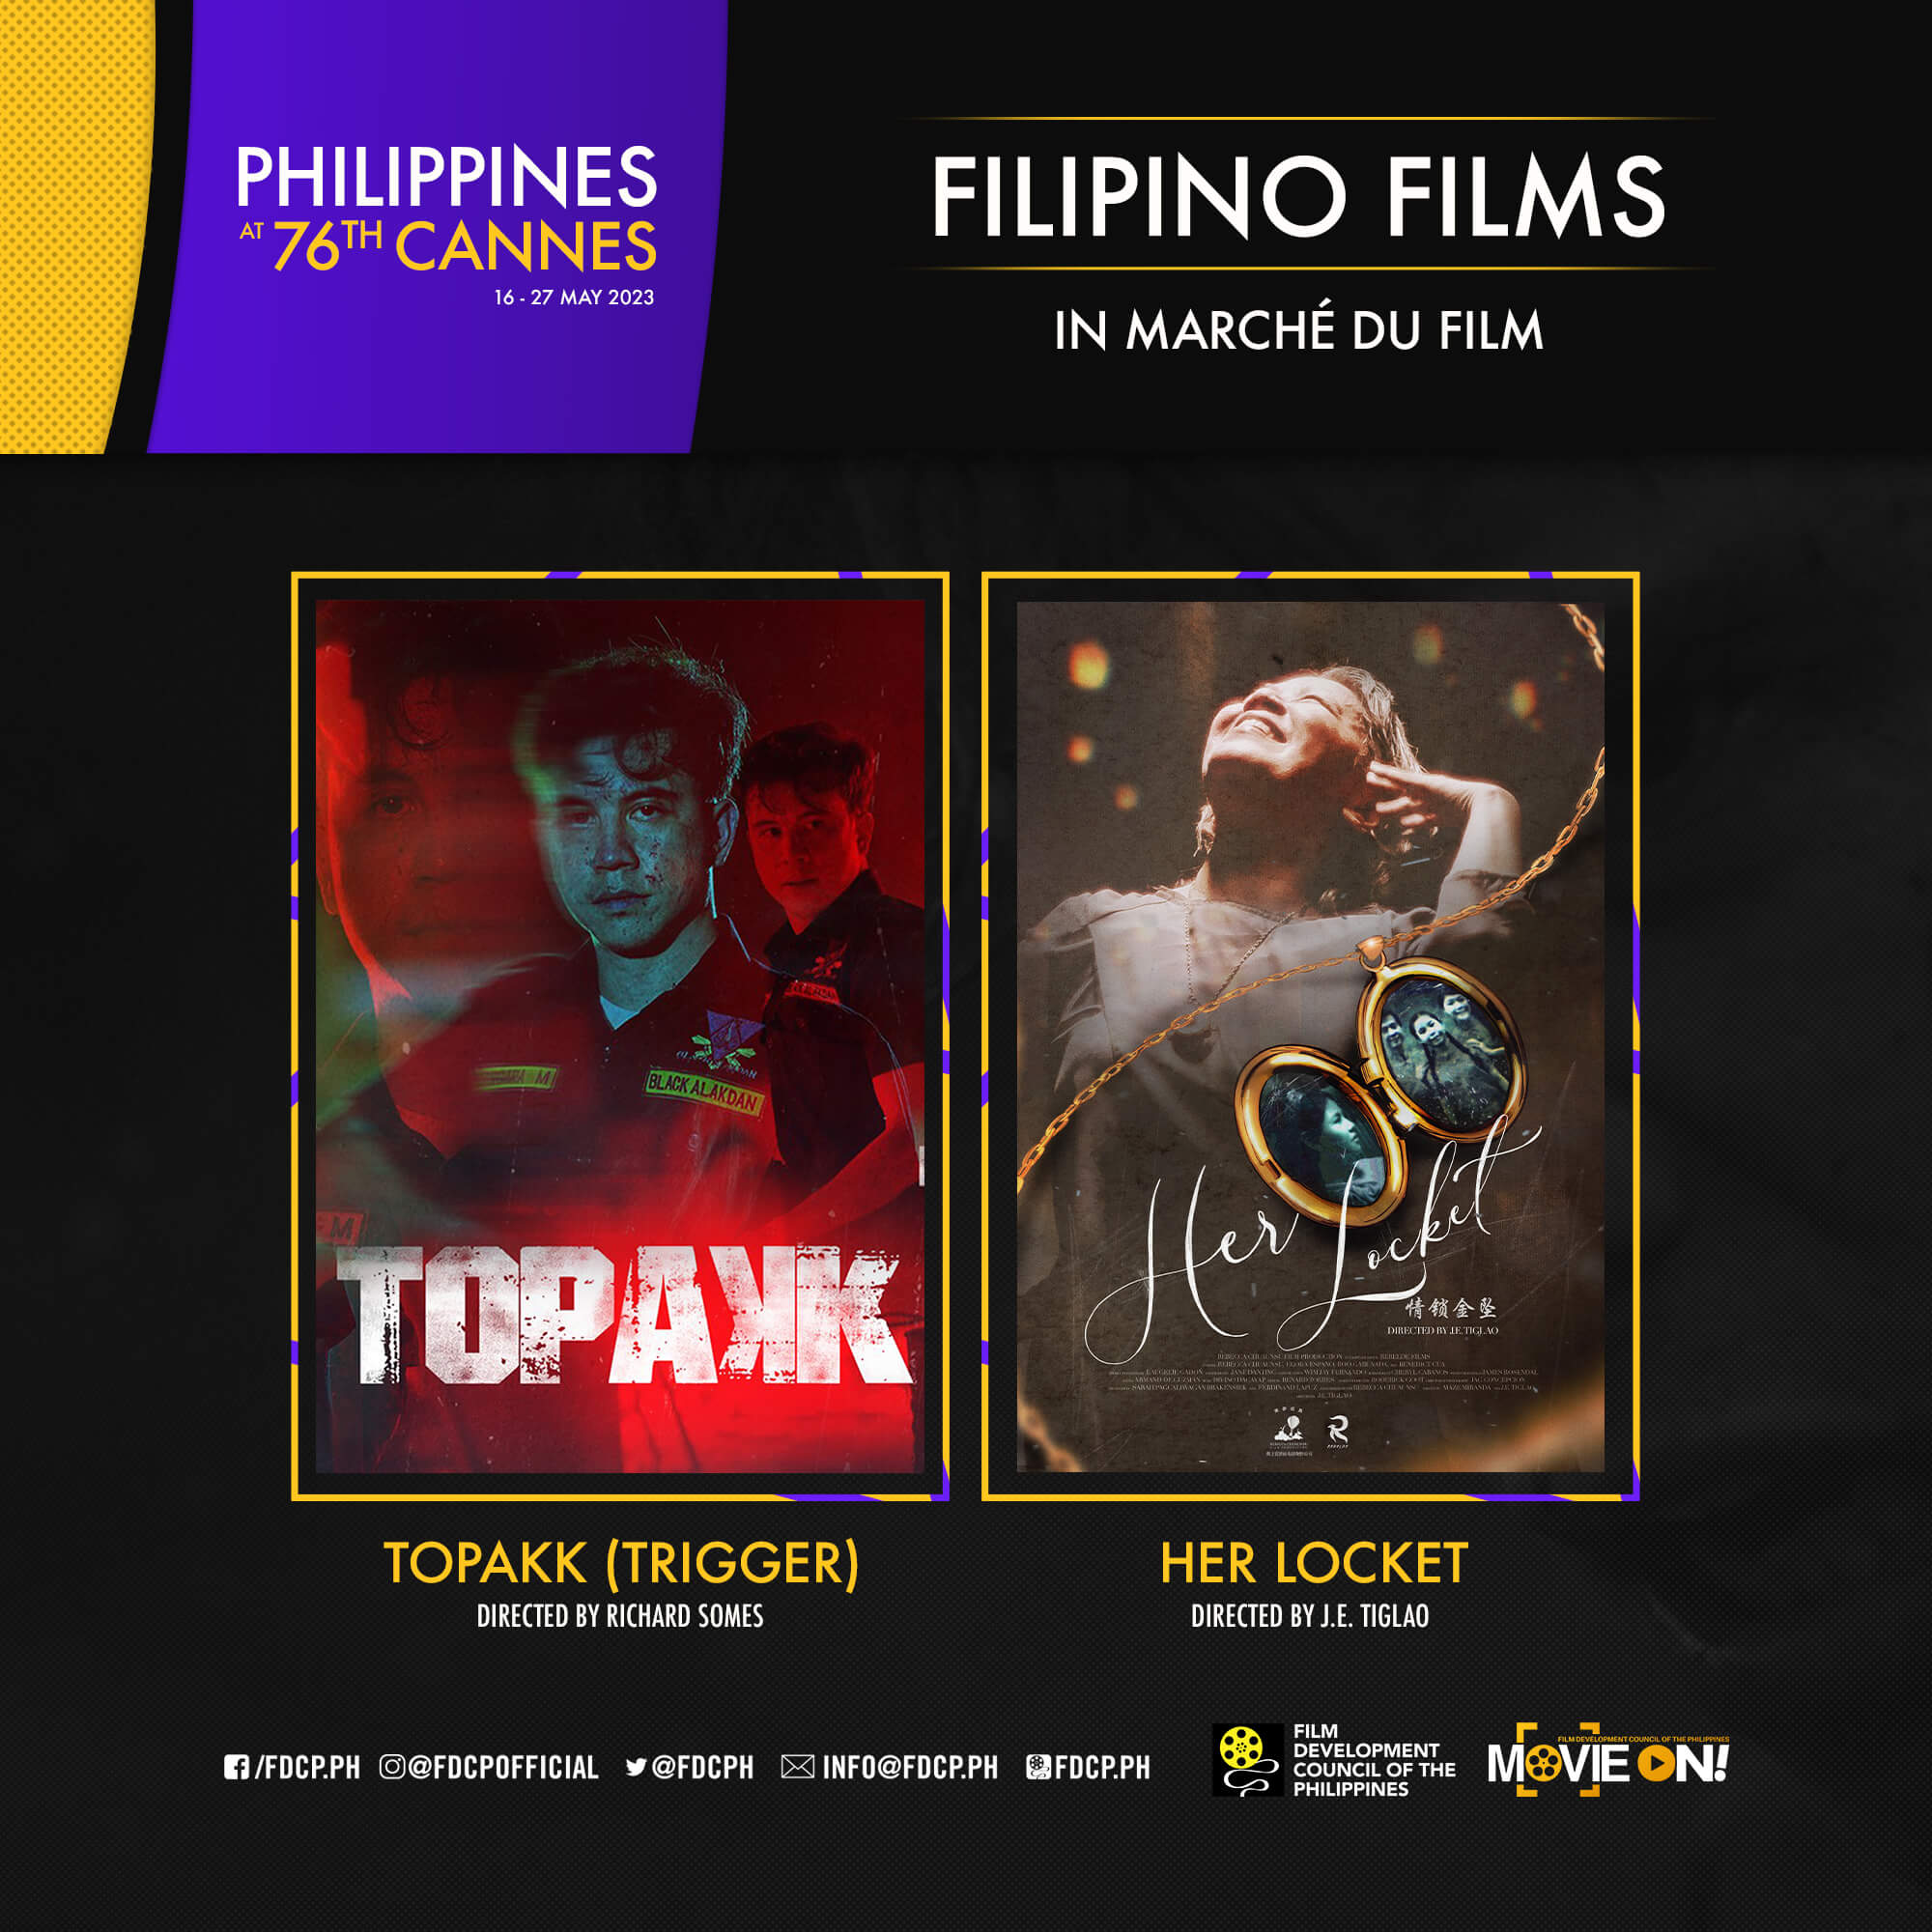 The official posters of "TOPAKK" and "Her Locket"